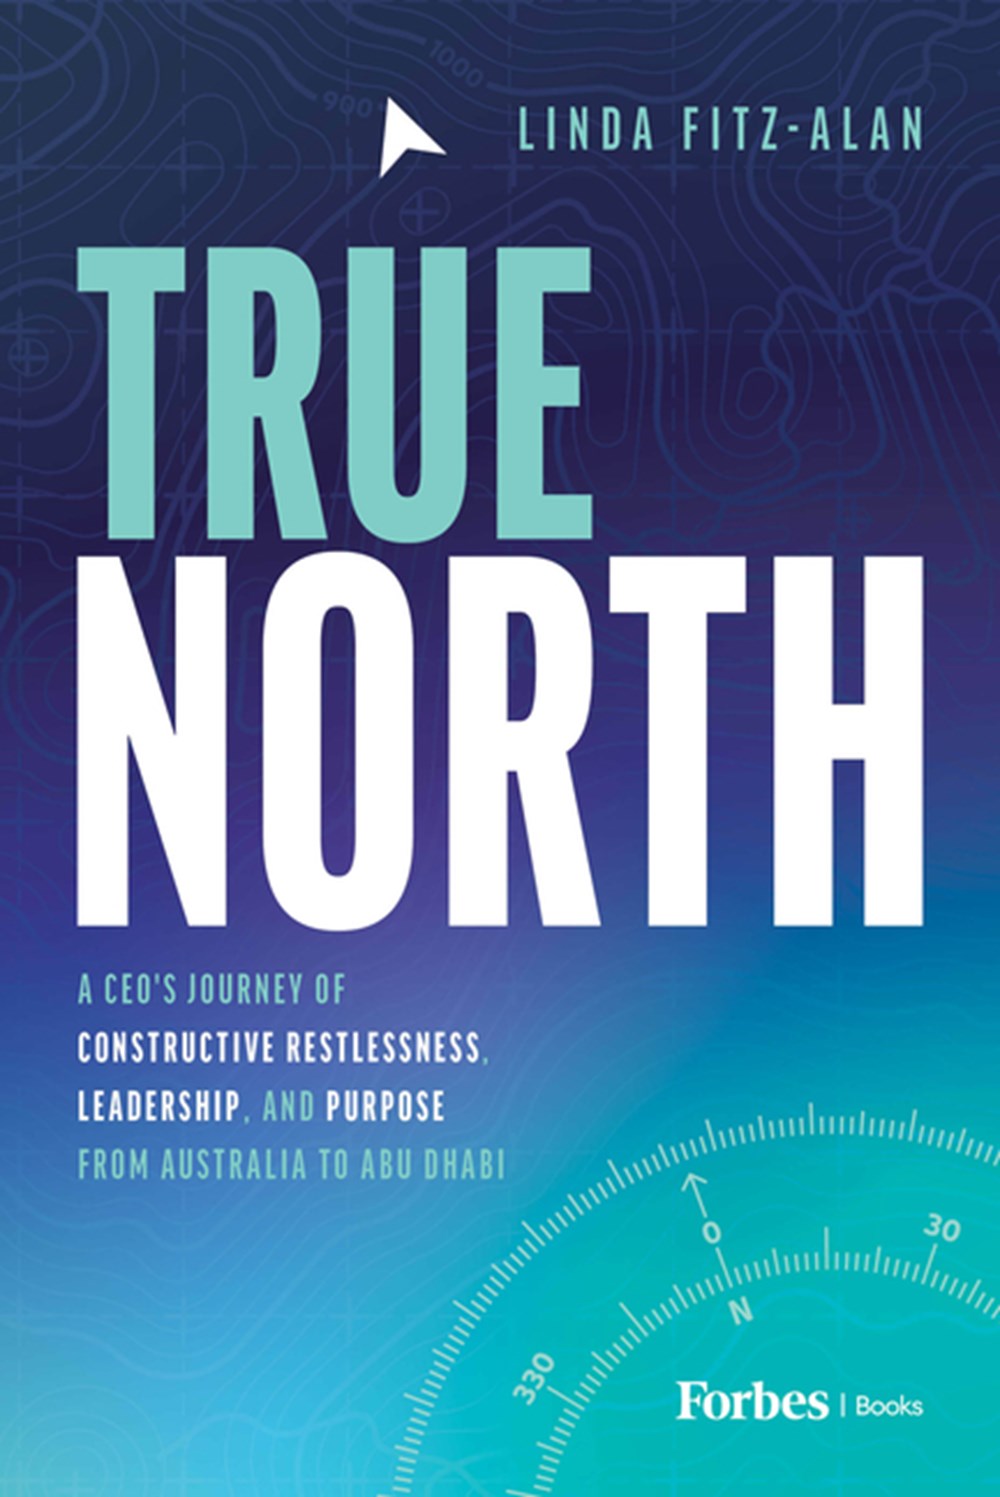 True North: A Ceo's Journey of Constructive Restlessness, Leadership, and Purpose from Australia to 